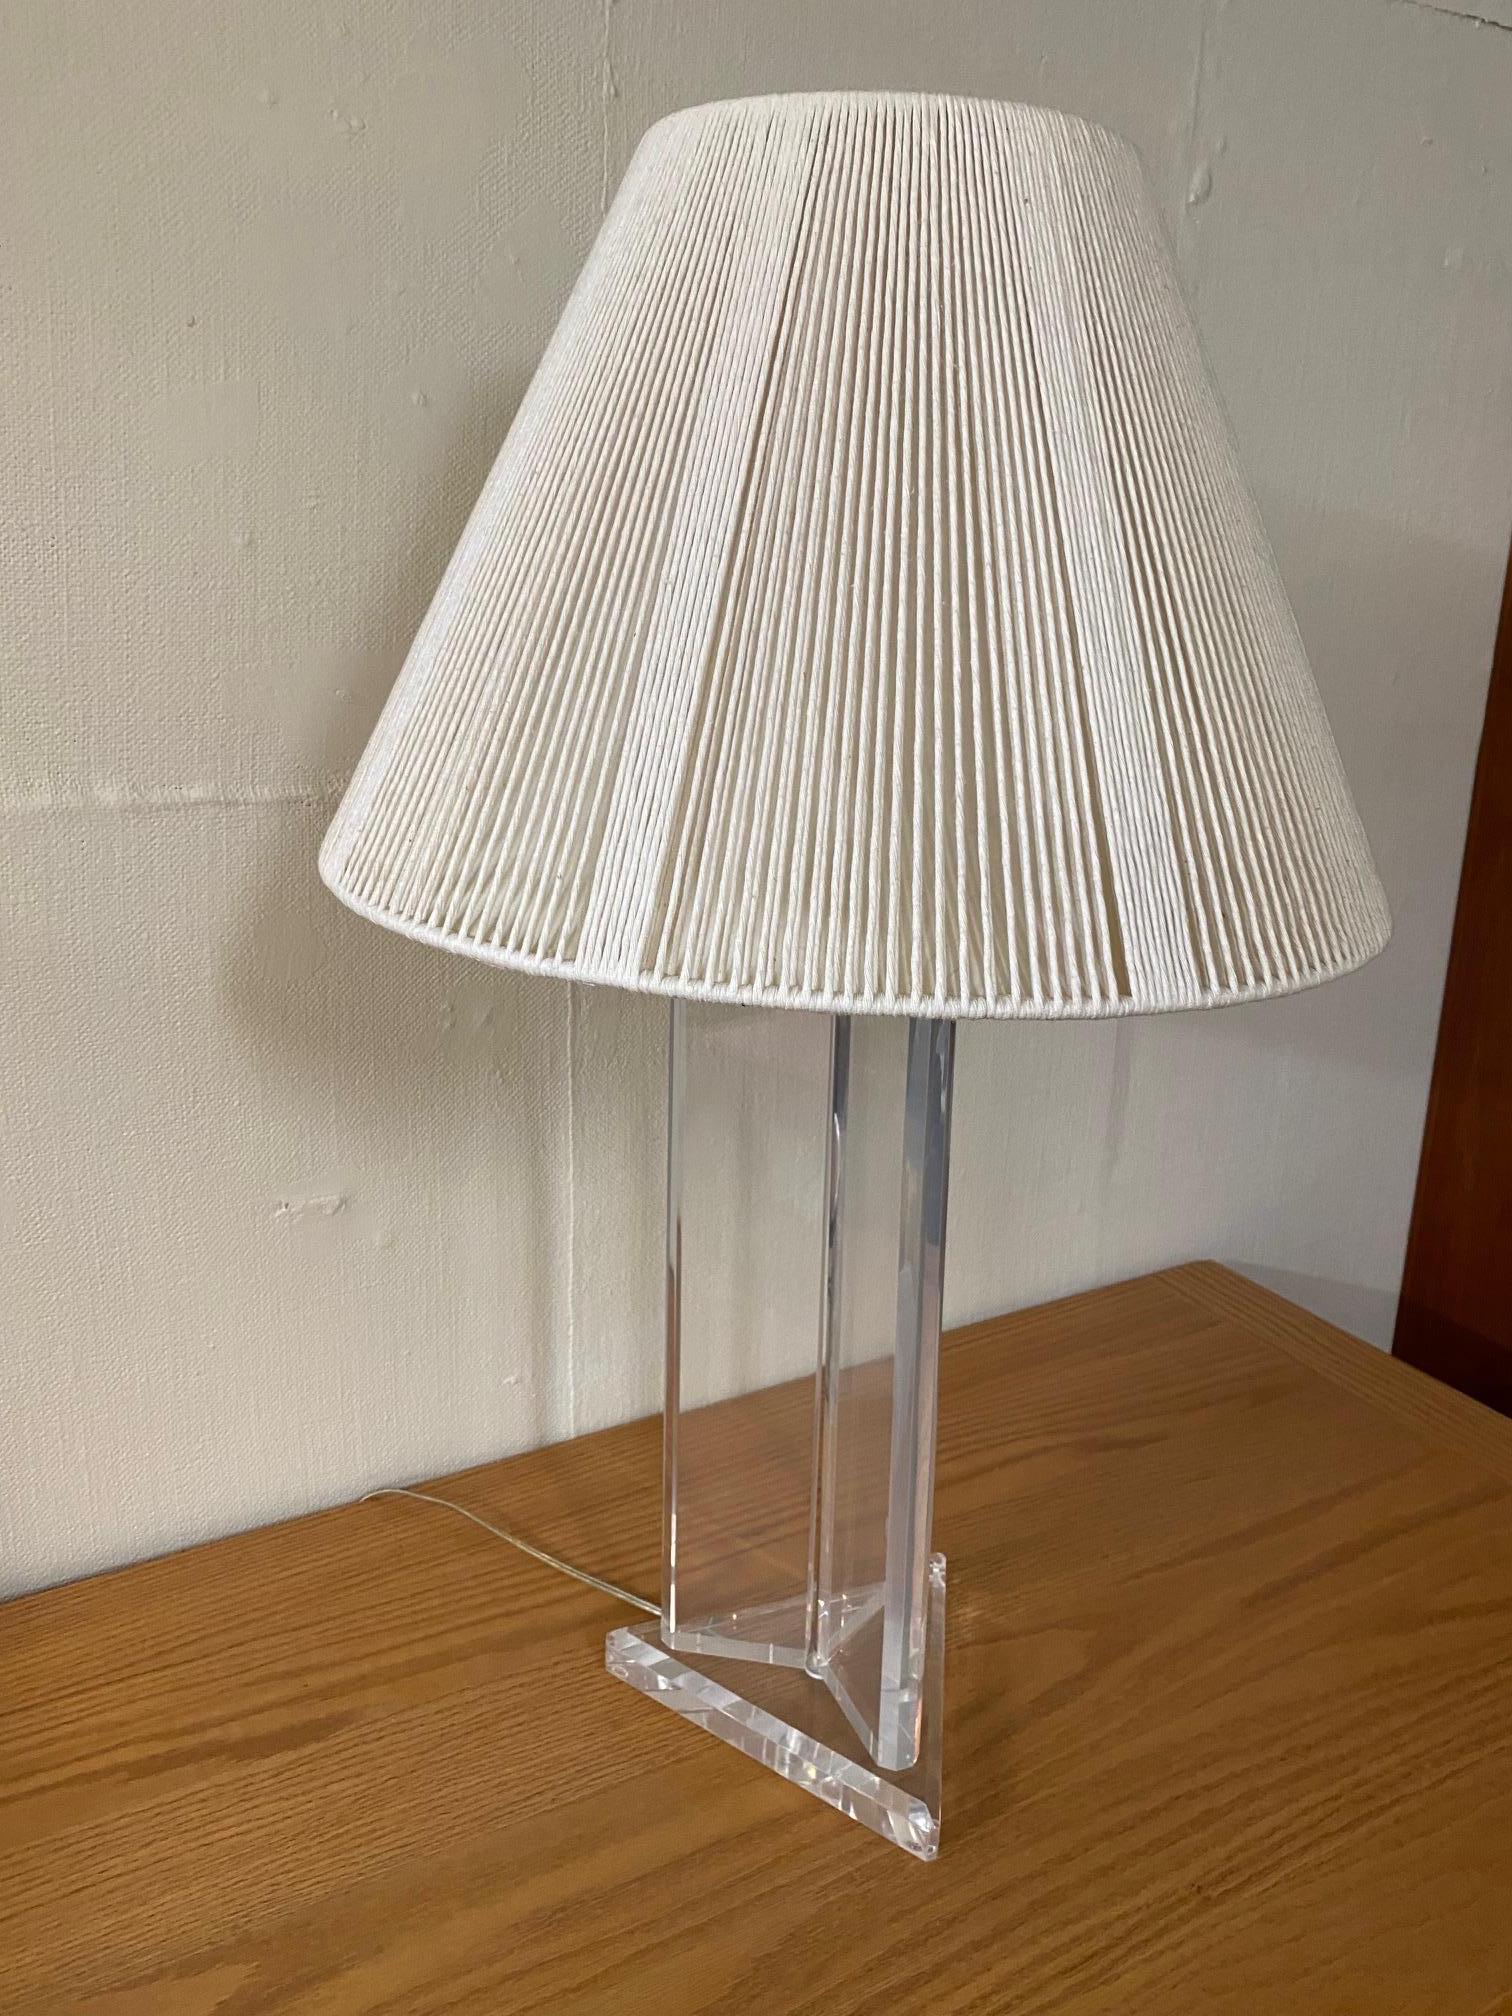 Great looking mid century modern lucite lamp with original string shade.
Lamp is 9